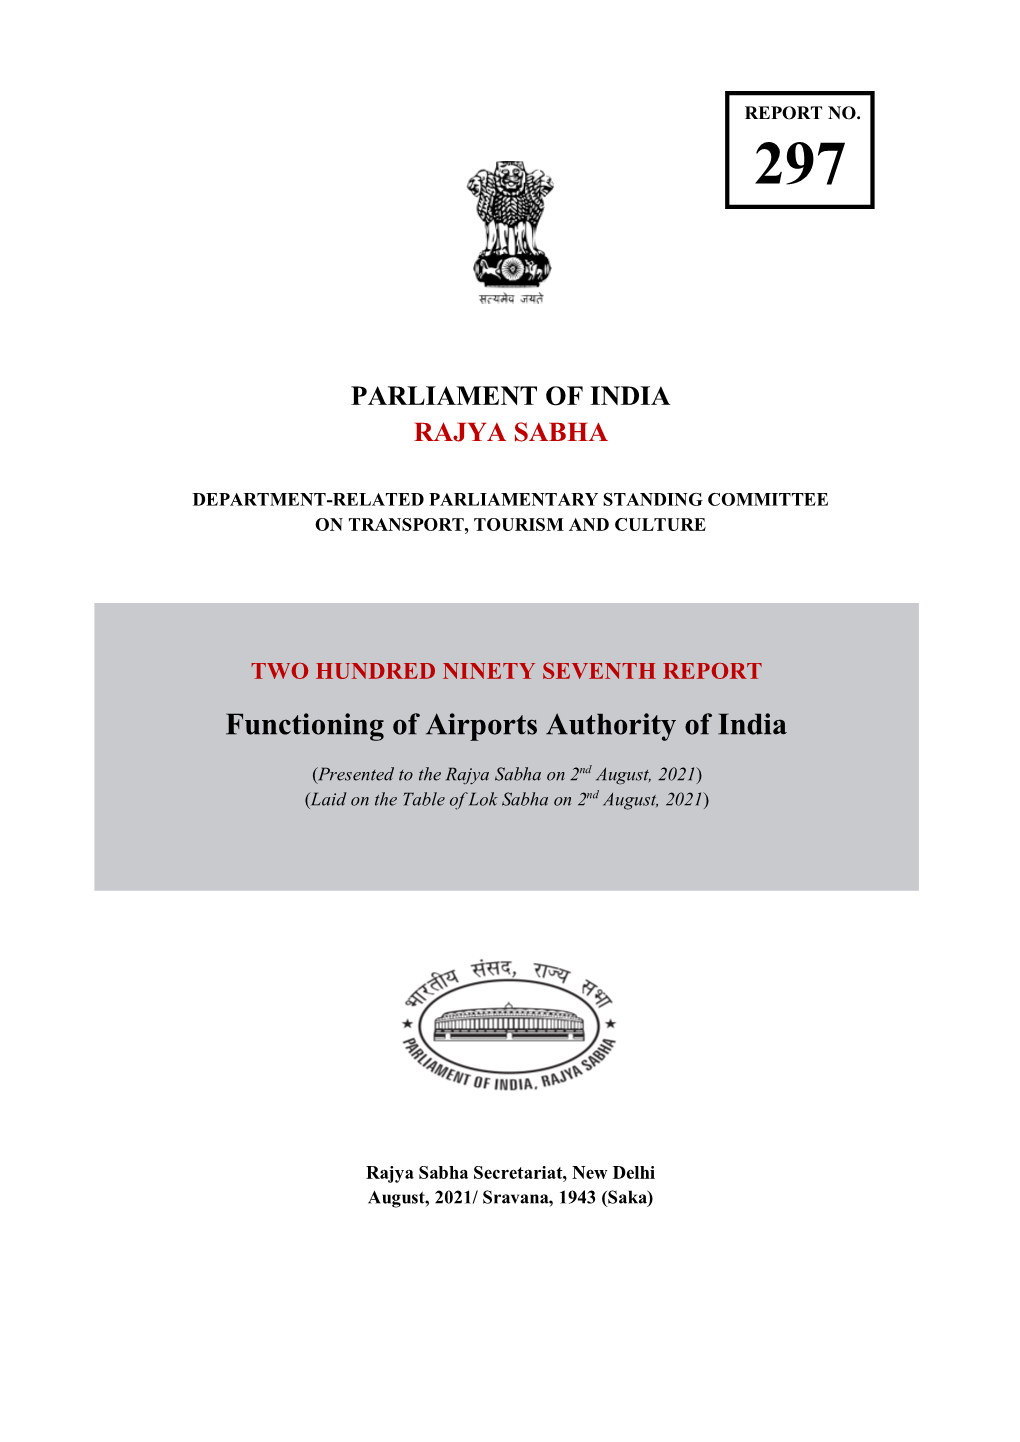 Committee Report: Functioning of Airports Authority of India